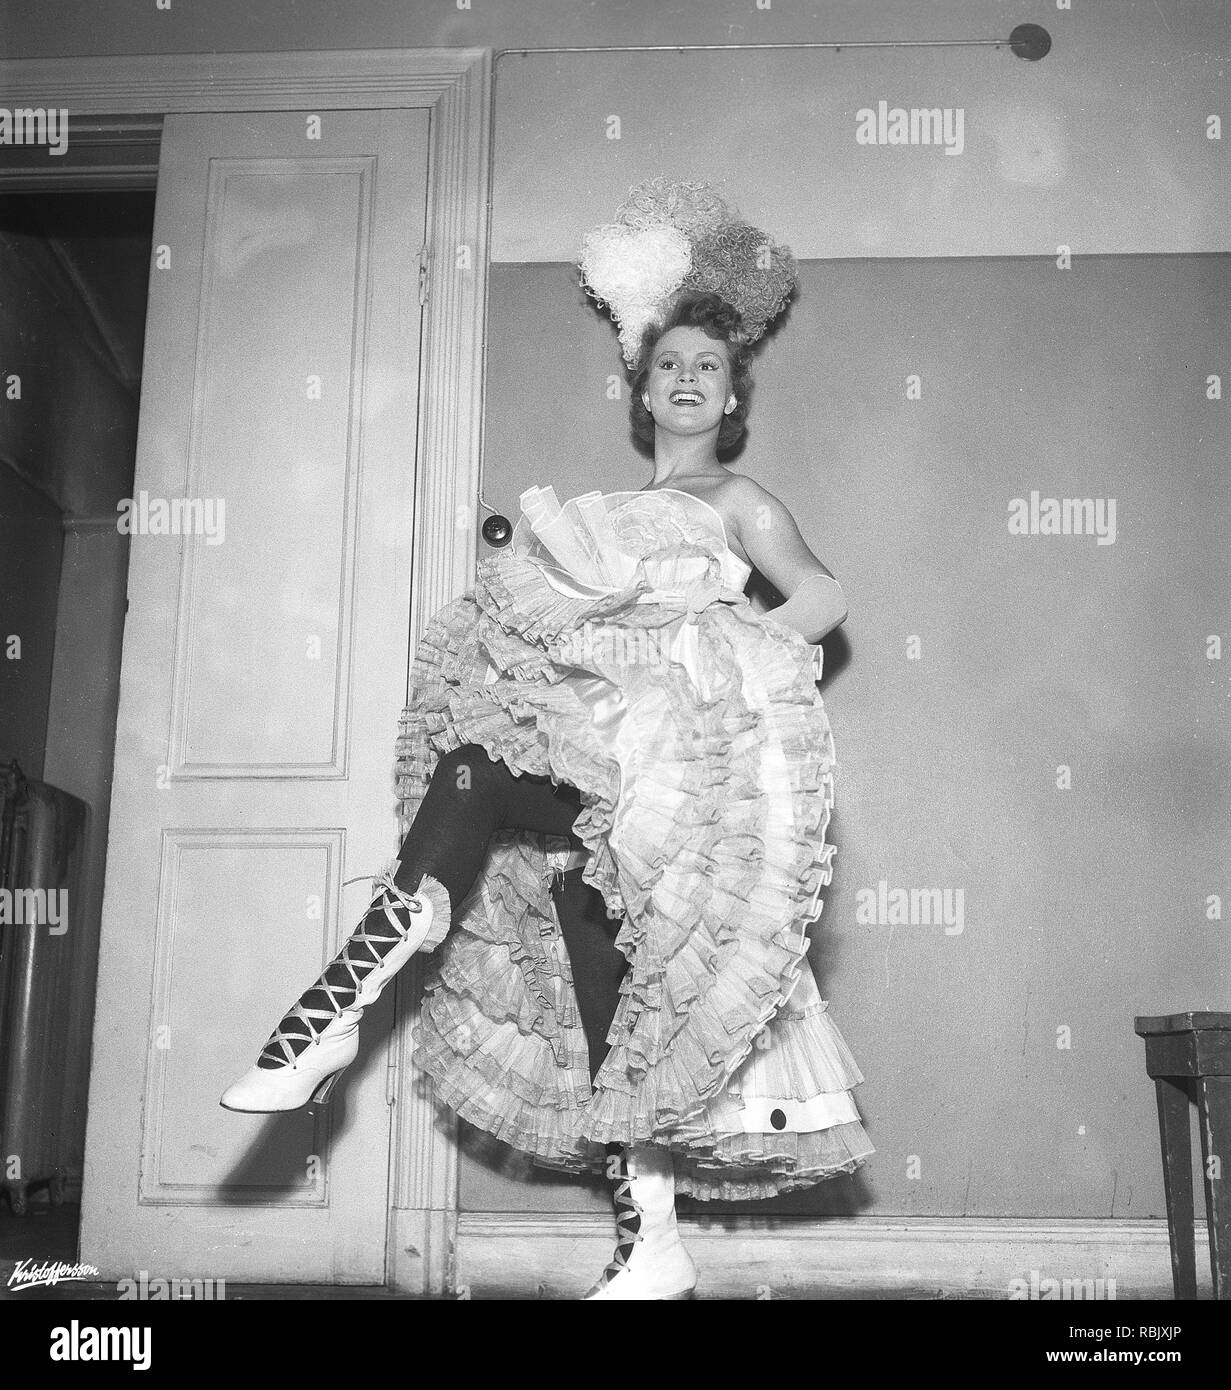 The Can-Can dance. A high-energy, physically demanding dance that became a popular music hall dance in the 1840s, continuing in popularity in French cabaret to this day. The main features of the dance are the vigorous manipulation of skirts and petticoats, along with high kicks, splits and cartwheels. Here a woman dancing the Can-Can in the 1950s. Photo Kristoffersson ref BM106-3 Sweden Stock Photo